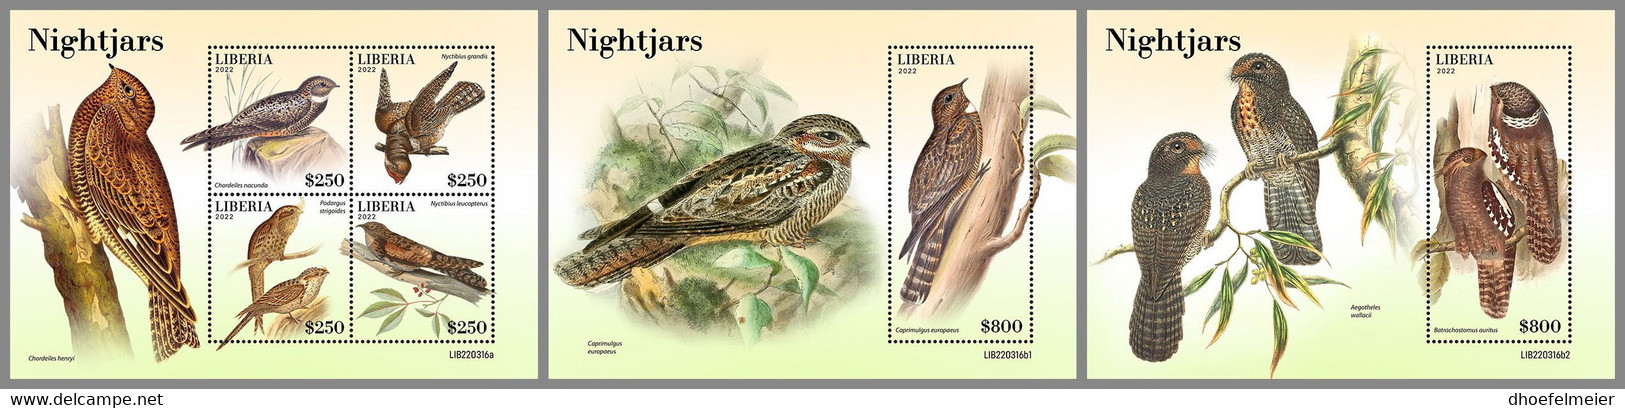 LIBERIA 2022 MNH Nightjars Nachtschwalben Engoulevents M/S+2S/S - OFFICIAL ISSUE - DHQ2249 - Golondrinas